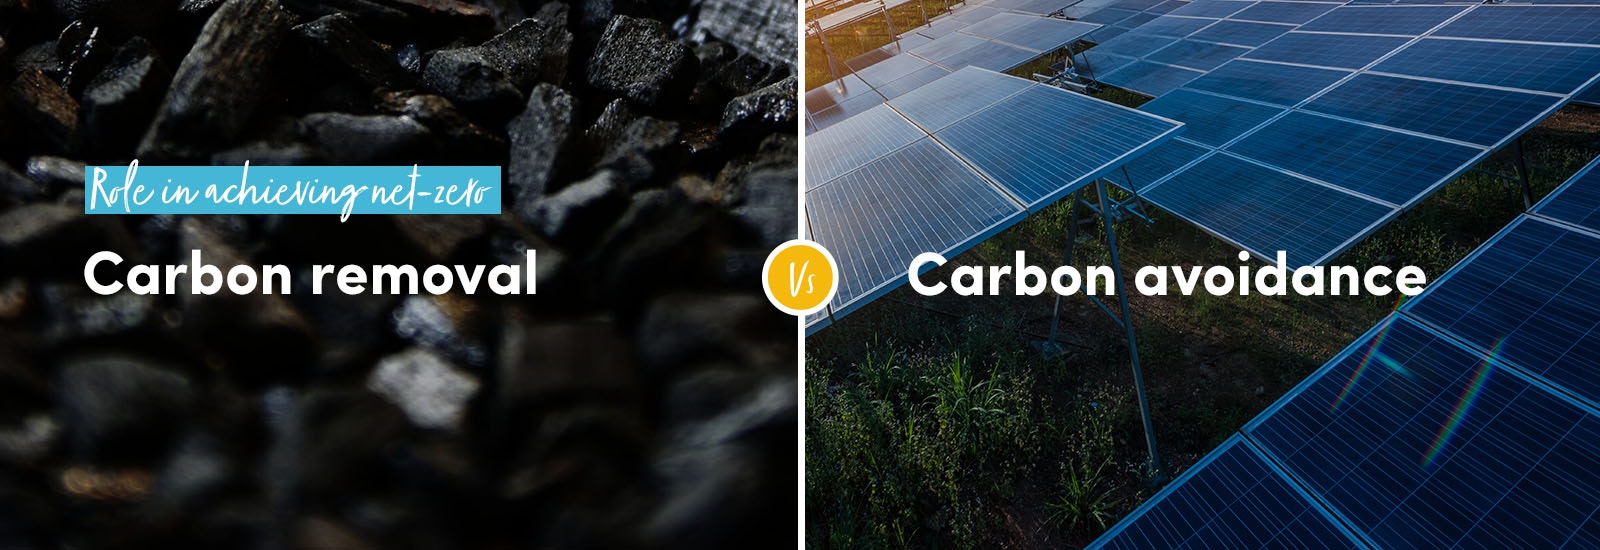 Role in achieving net-zero - carbon removal vs carbon avoidance